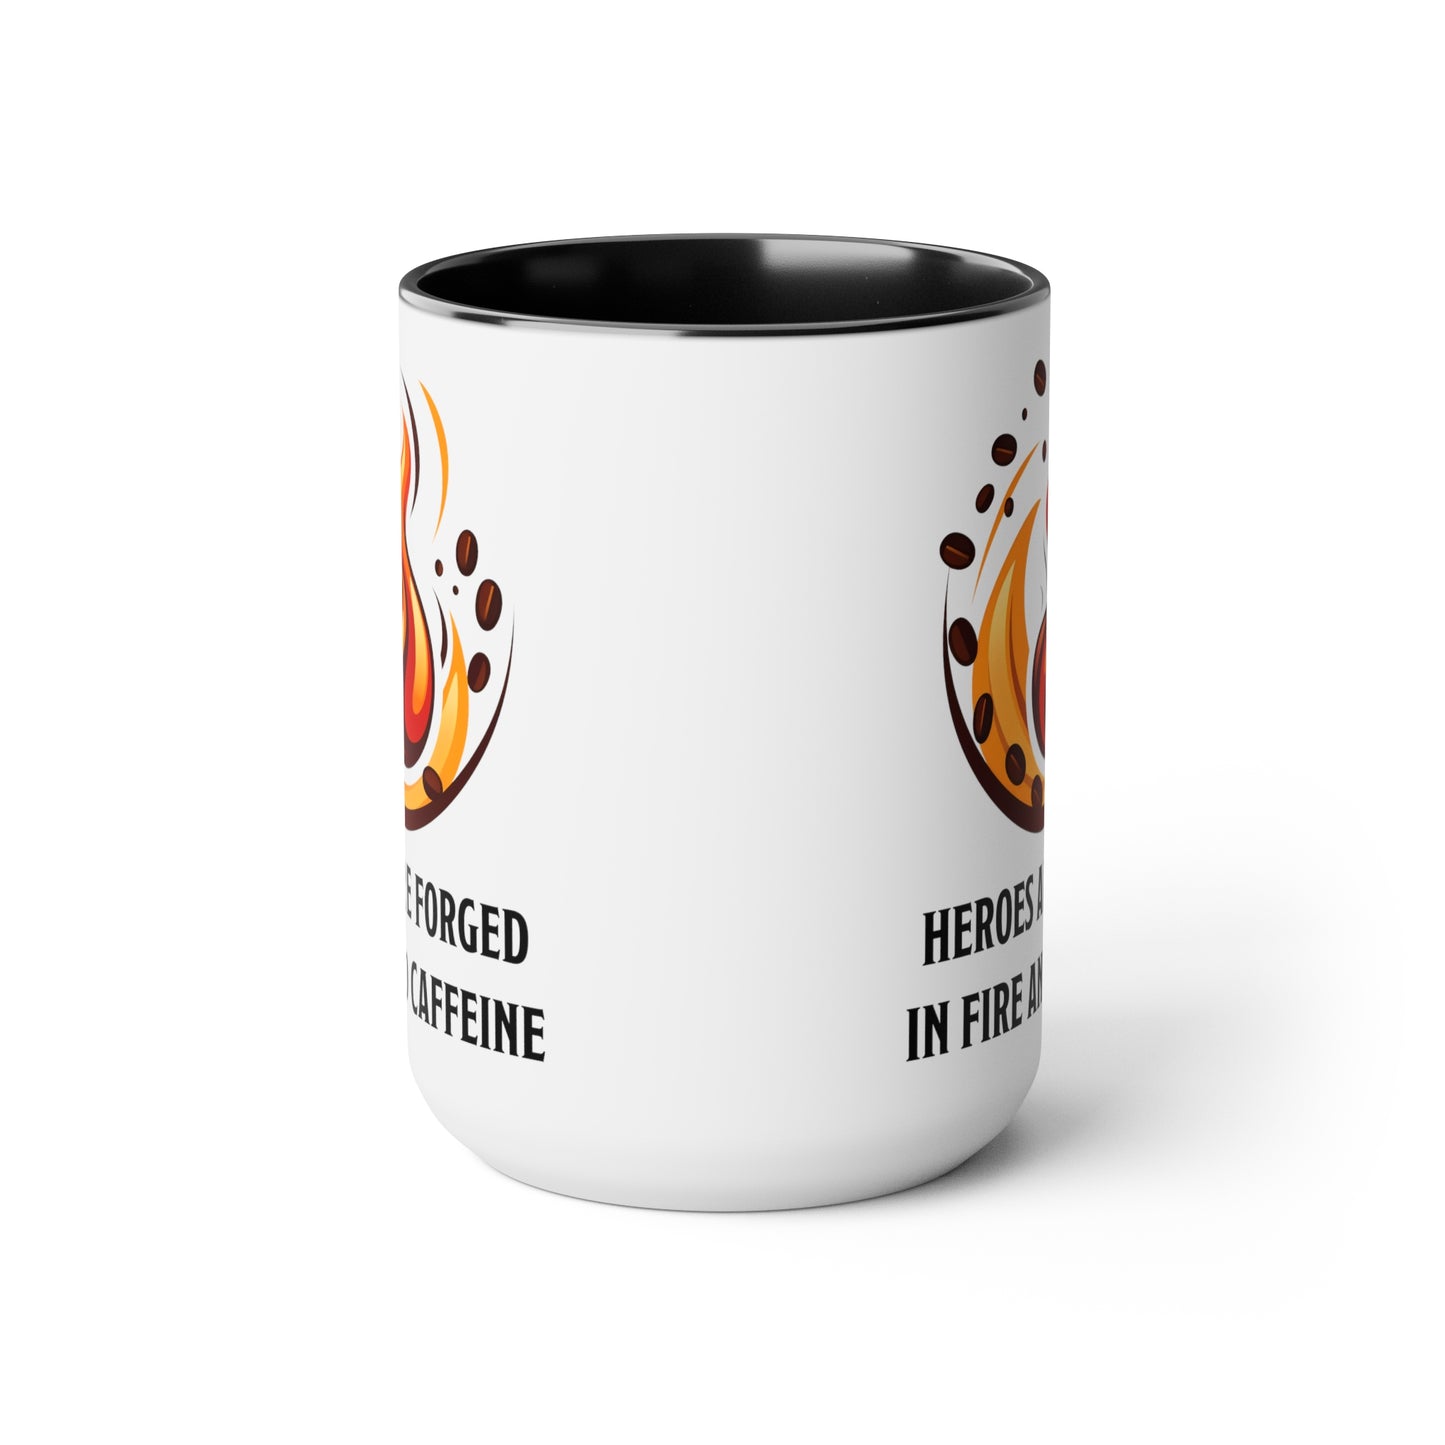 Heroes are Forged in Fire and Caffeine Ceramic Mug 15oz, DnD Mug, Dungeon Master Gift, Two-Tone Coffee Mugs